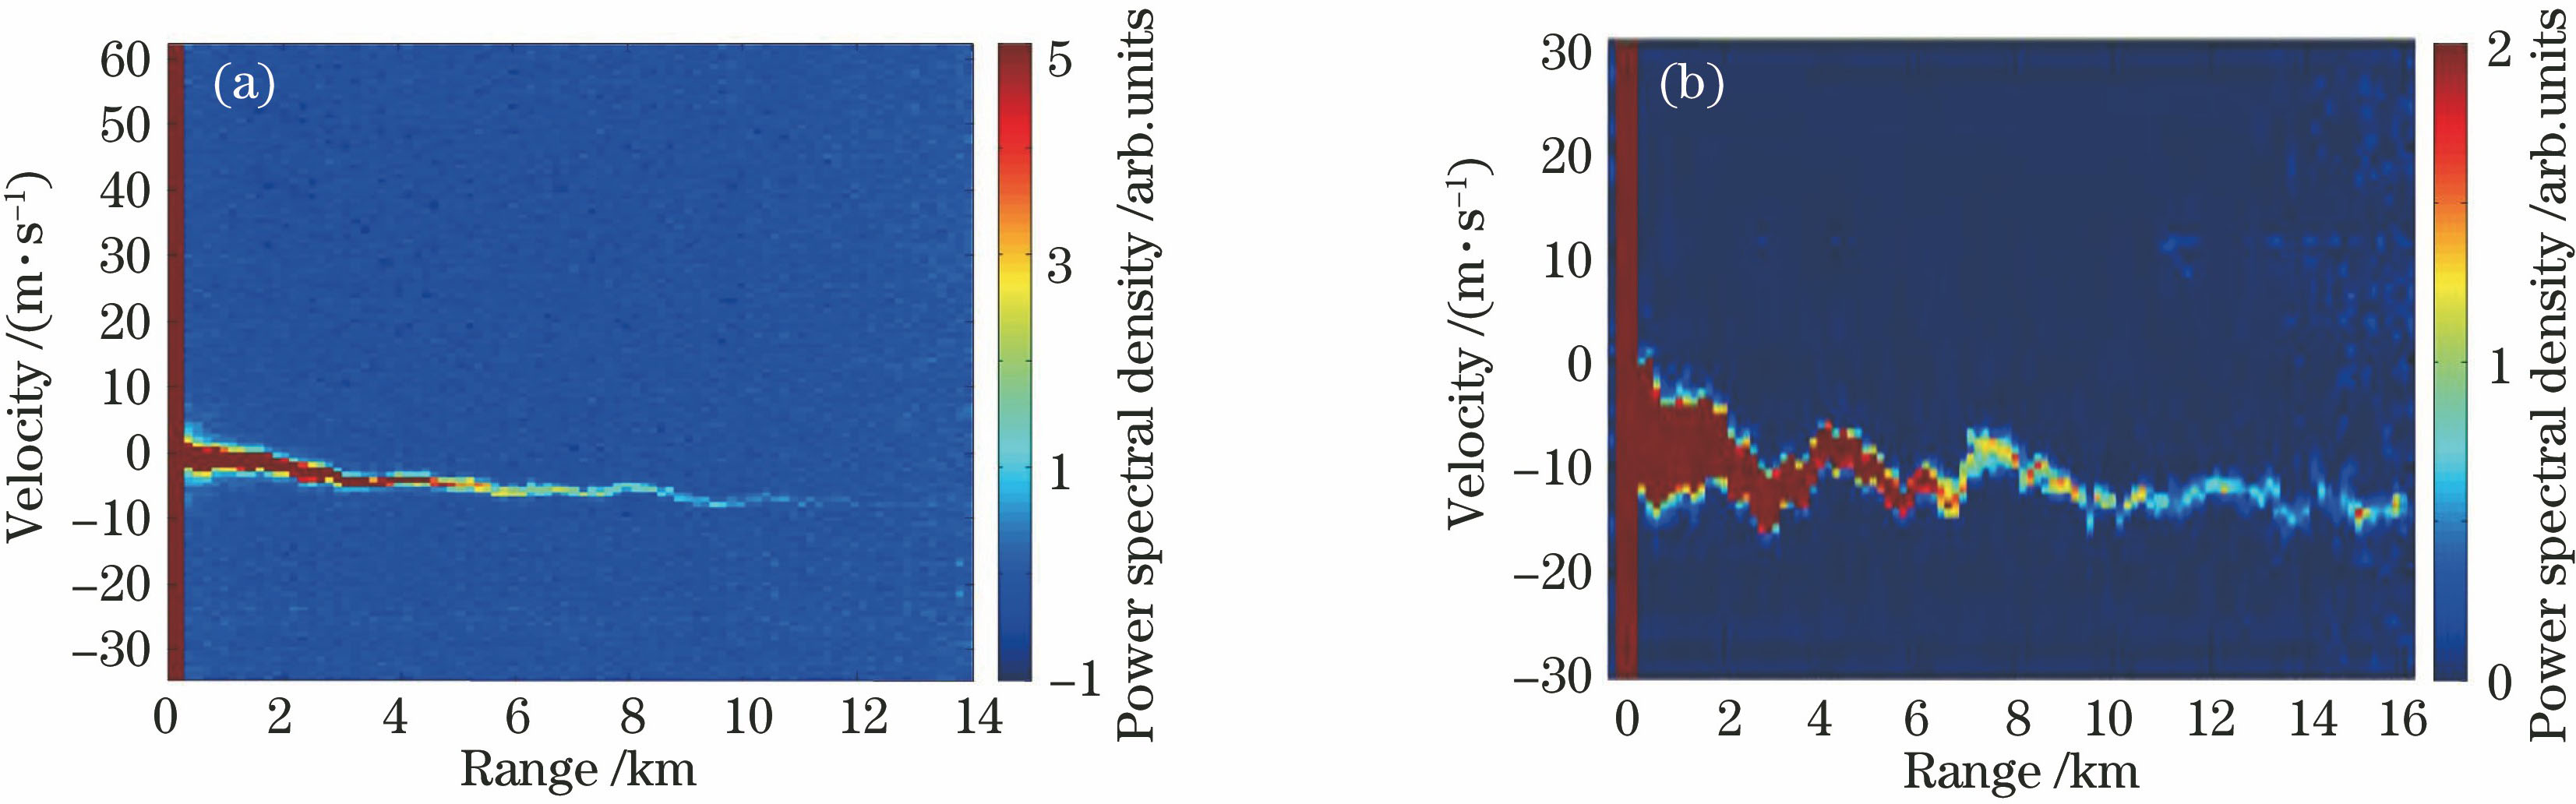 Spectral images of wind speed varying with distance. (a) 1.5 μm all-fiber single frequency lidar; (b) long-distance Doppler lidar